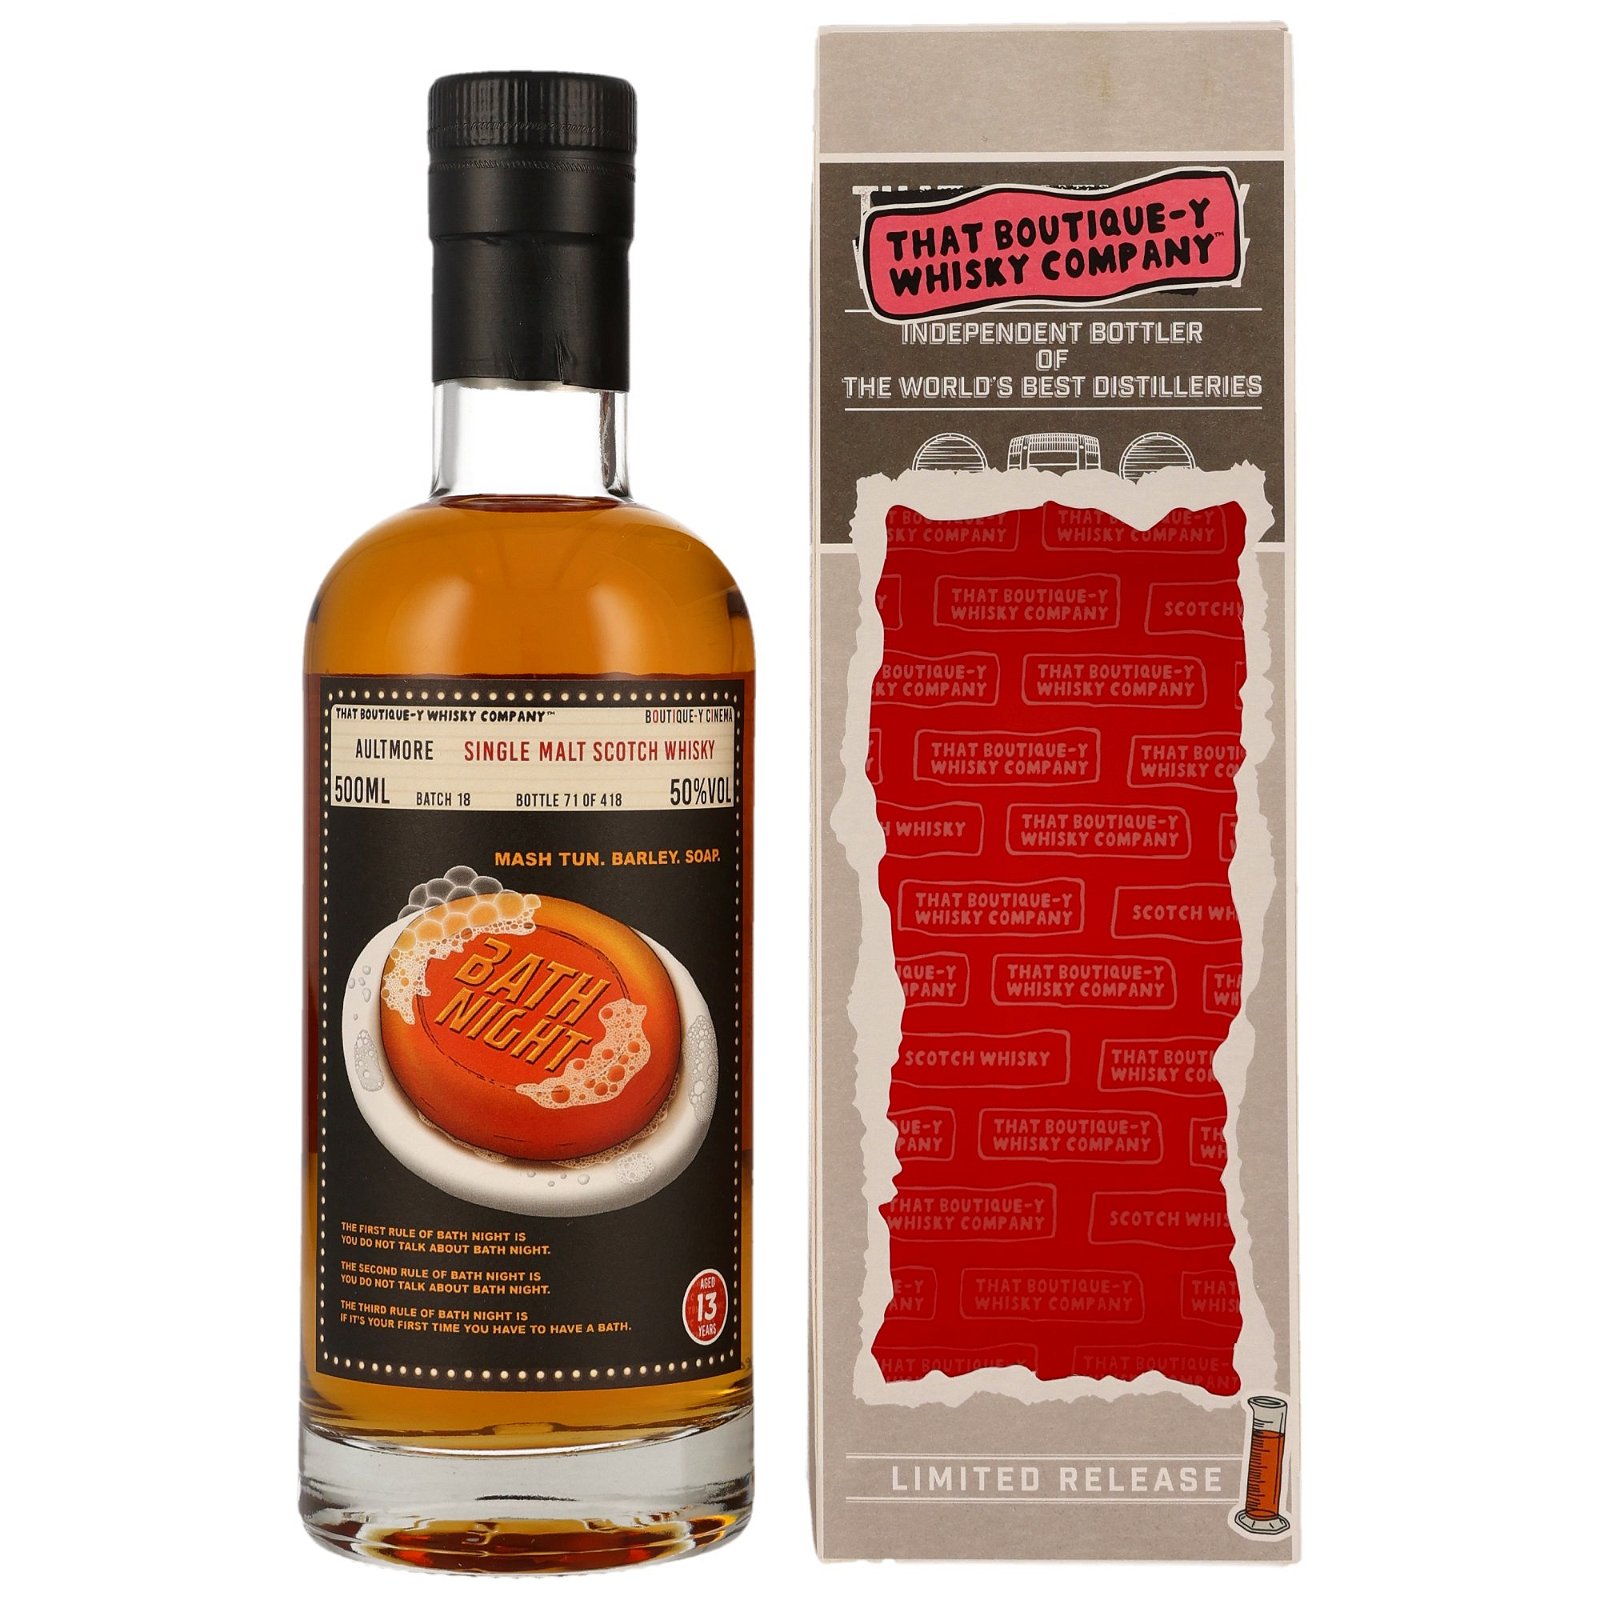 Aultmore 13 Jahre Bath Night Batch No. 18 (That Boutique-y Whisky Company)